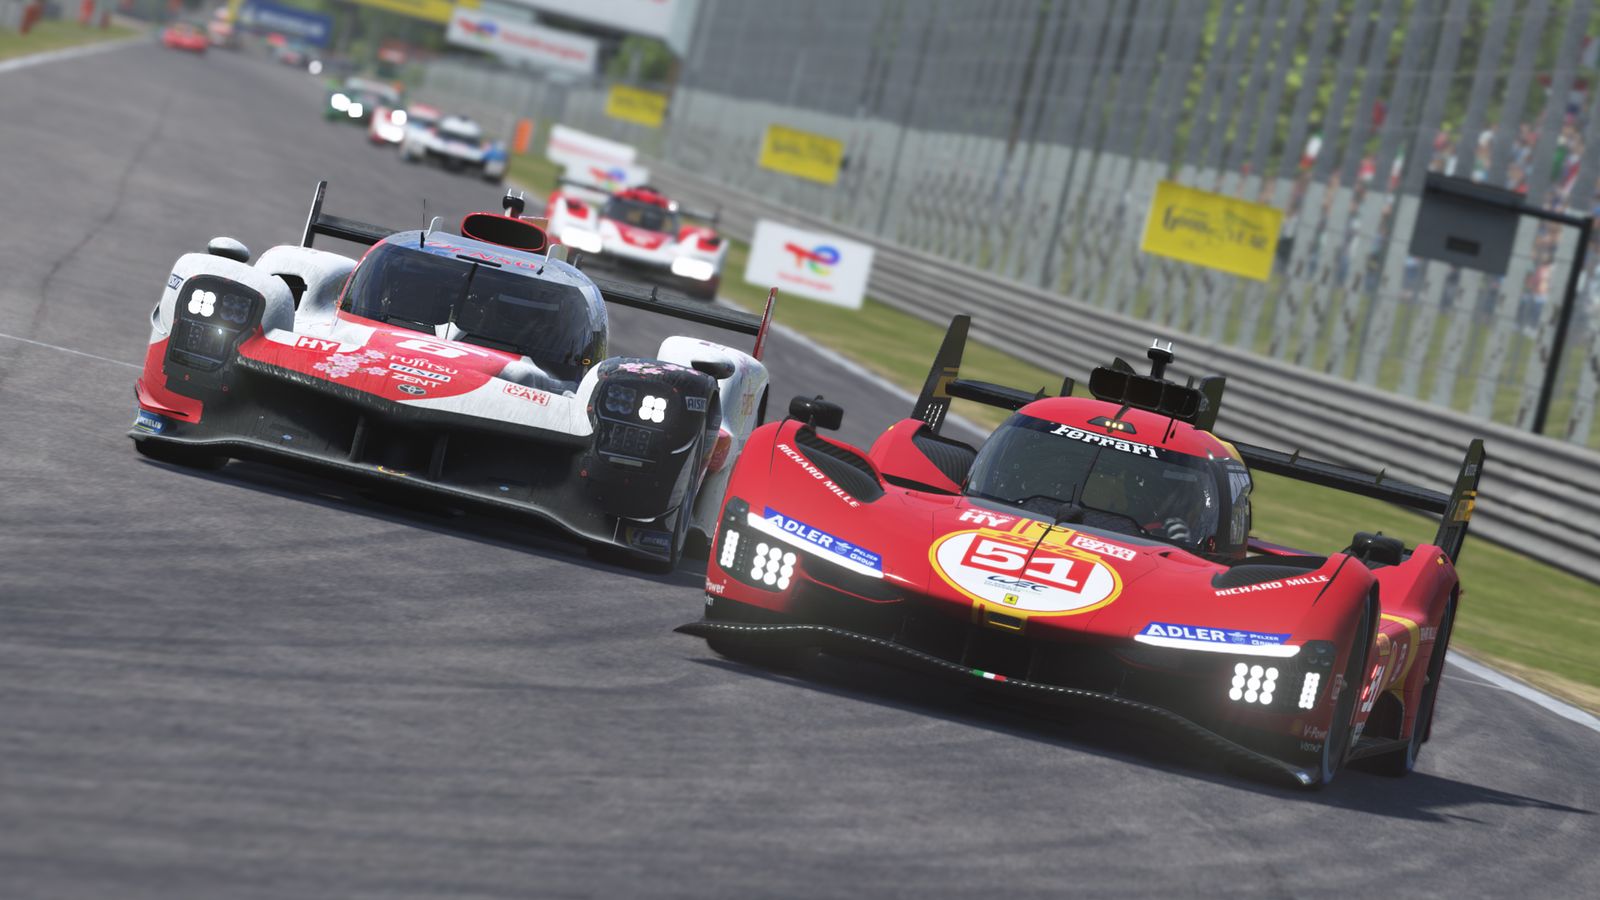 Le Mans Ultimate coming to consoles "makes sense," says Motorsport Games CEO